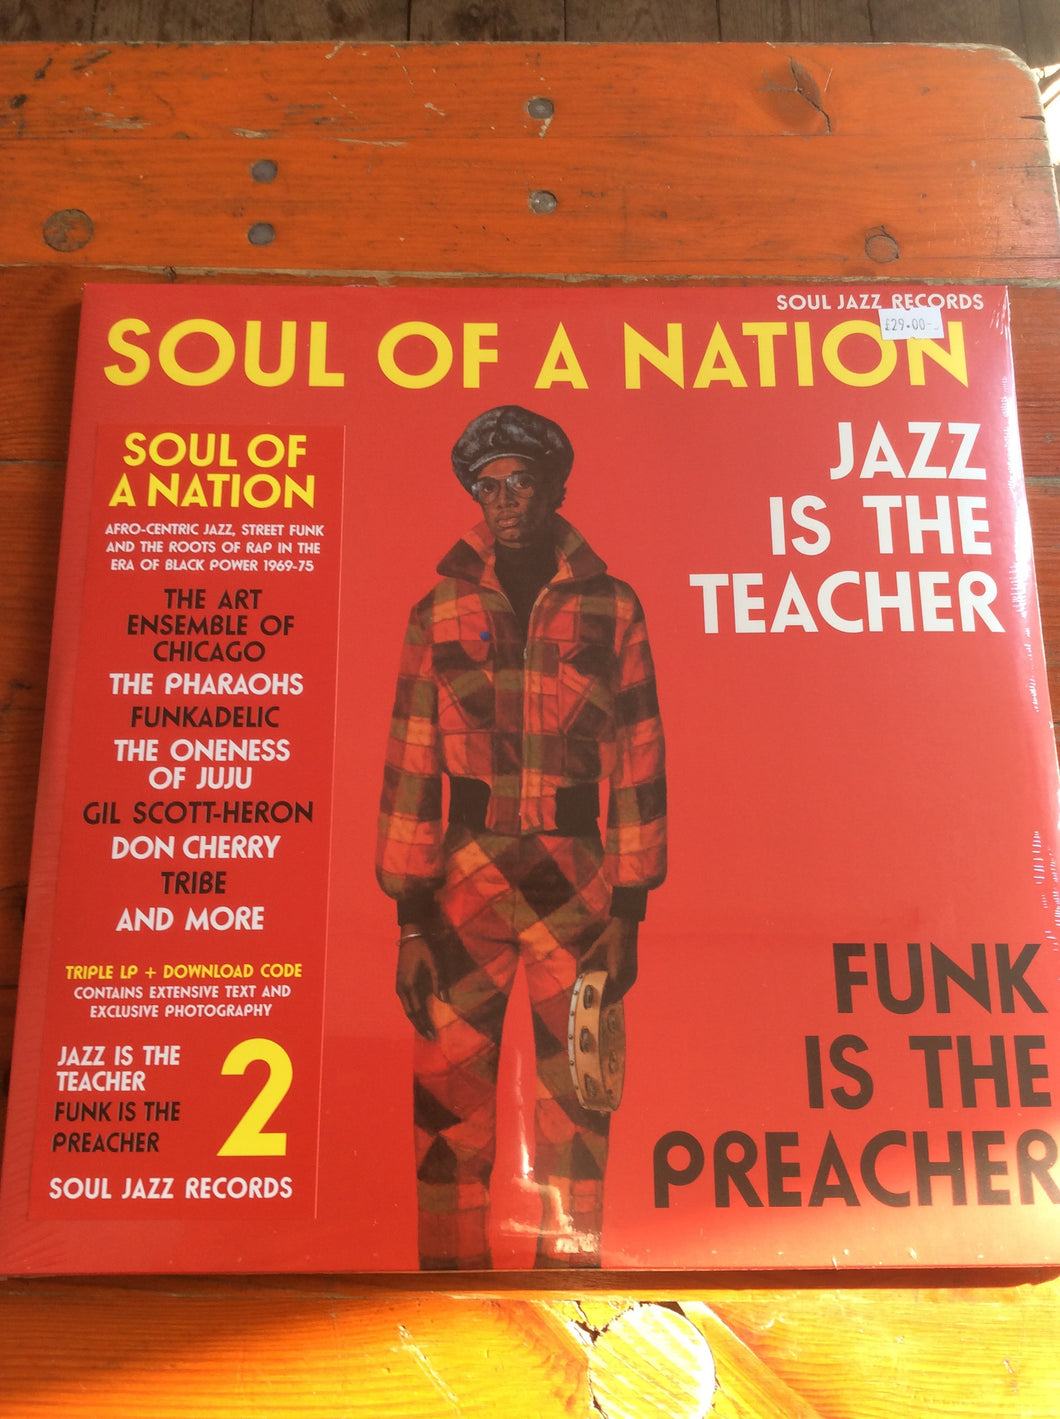 VA / Soul Jazz Records Presents - Soul of a Nation: Jazz is the Teacher, Funk is the Preacher - Afro-Centric Jazz, Street Funk and the Roots of Rap in the Black Power Era 1969-75